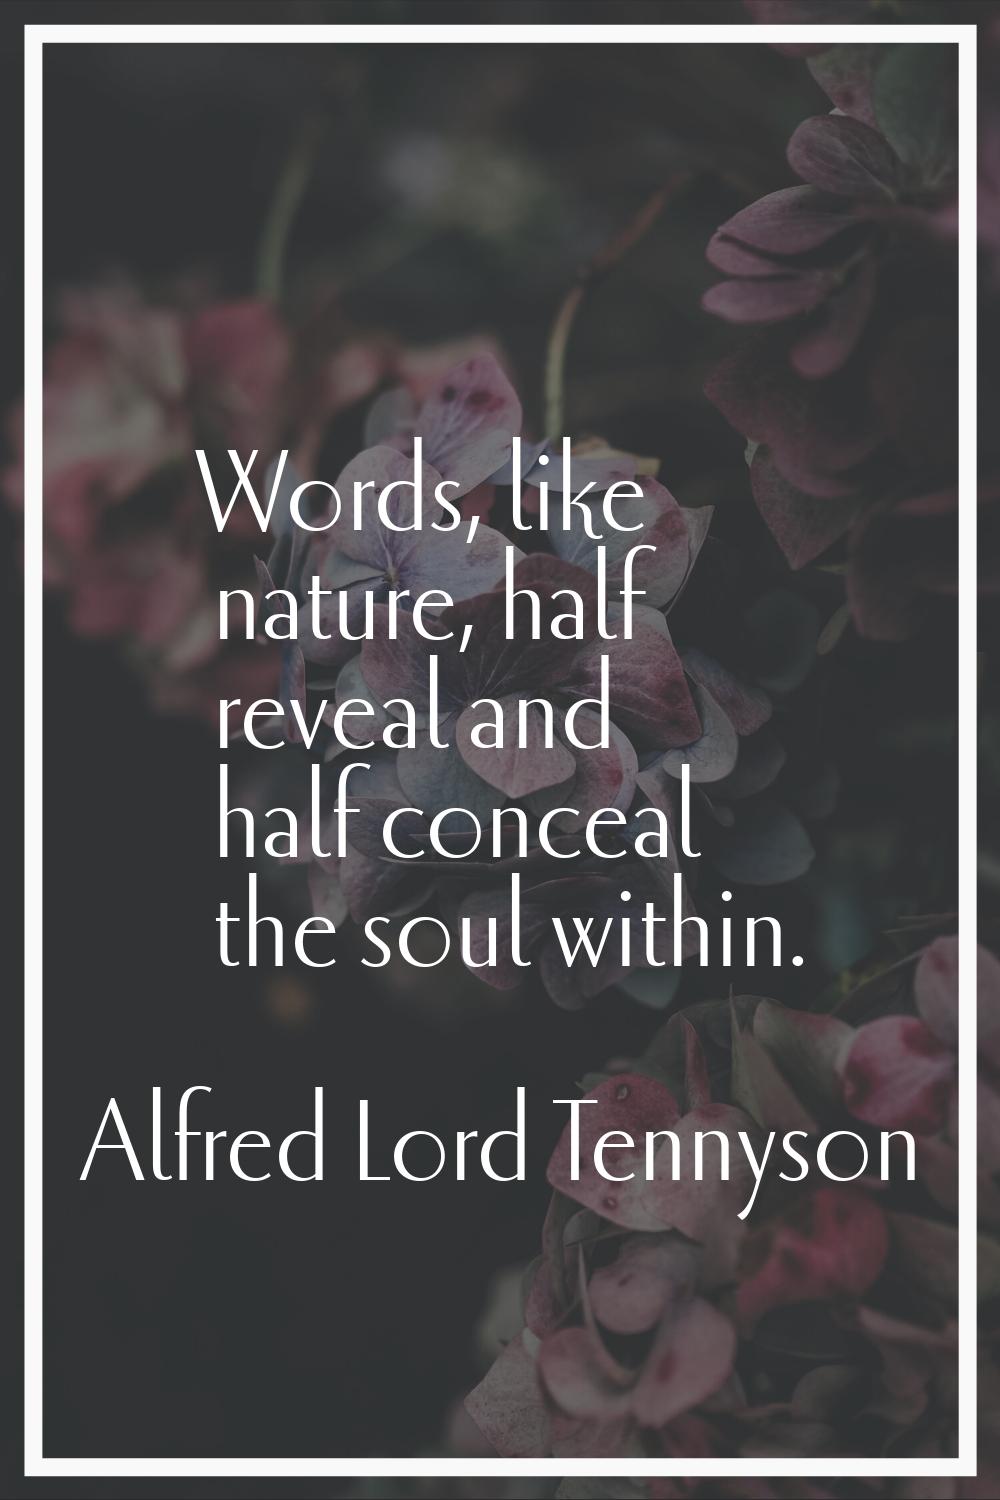 Words, like nature, half reveal and half conceal the soul within.